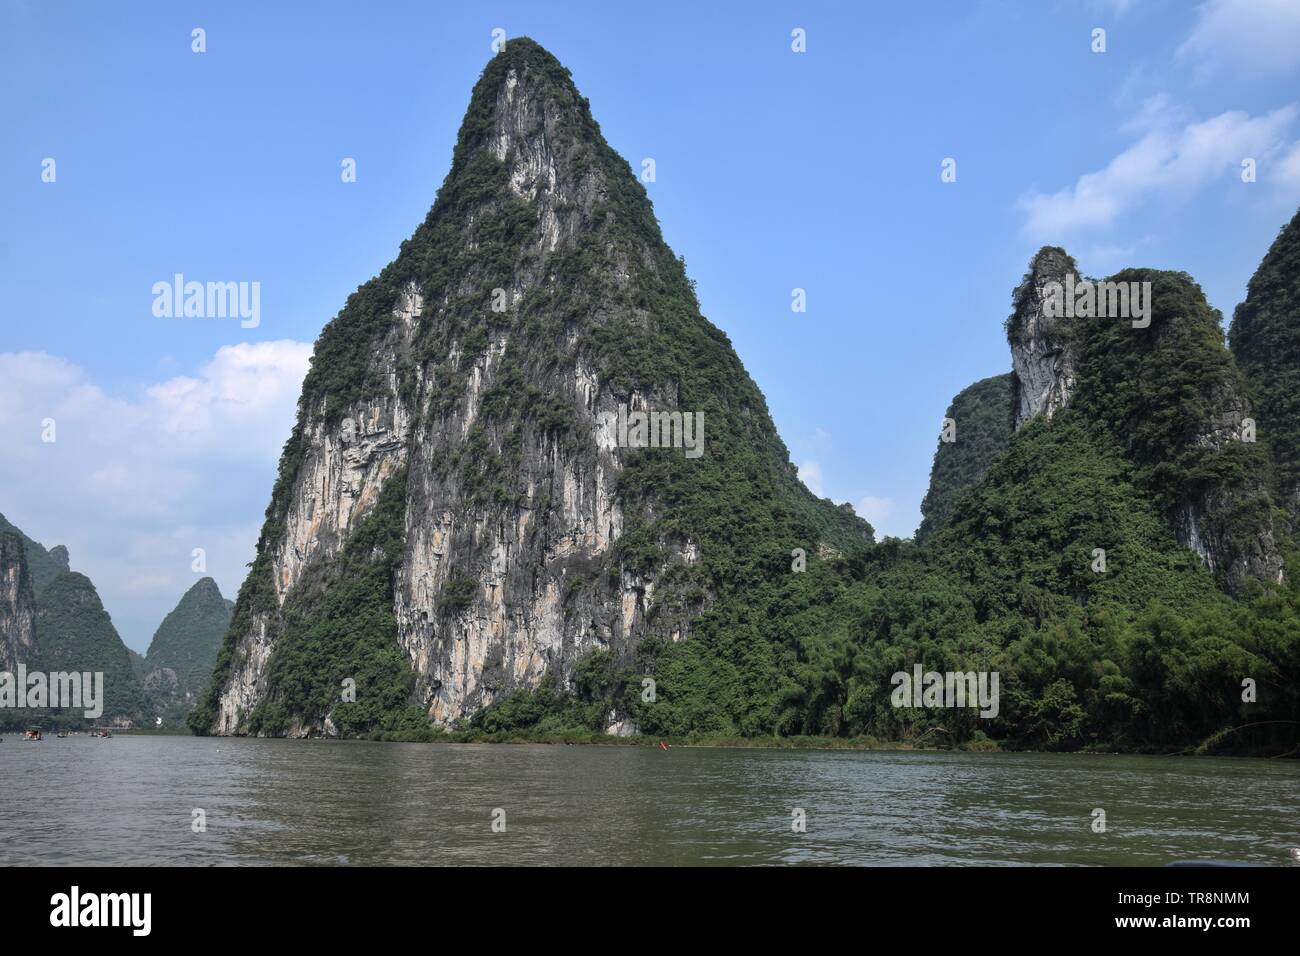 The area around small town Yangshuo in Guangxi Zhuang Autonomous Region in China is renowned for its karst landscape. Stock Photo